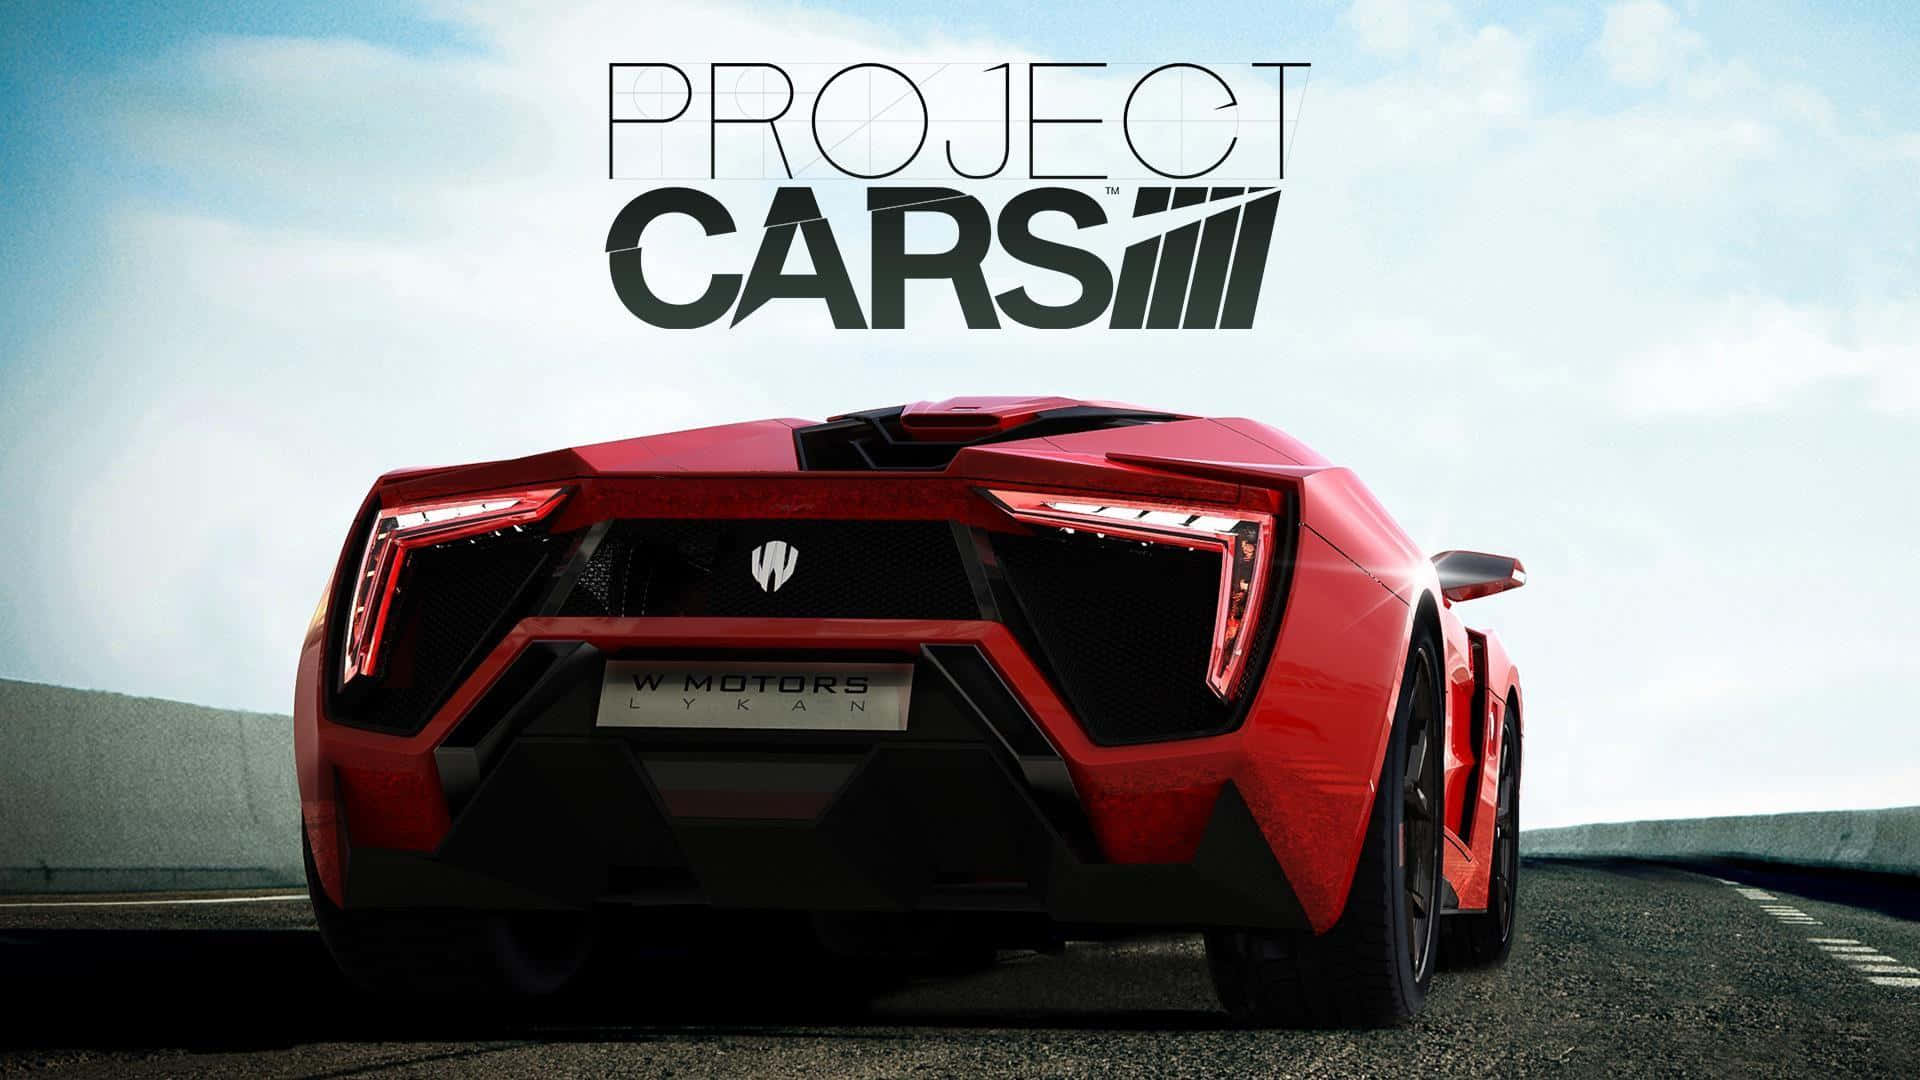 Get ready for the ultimate driving experience with Best Project Cars 2